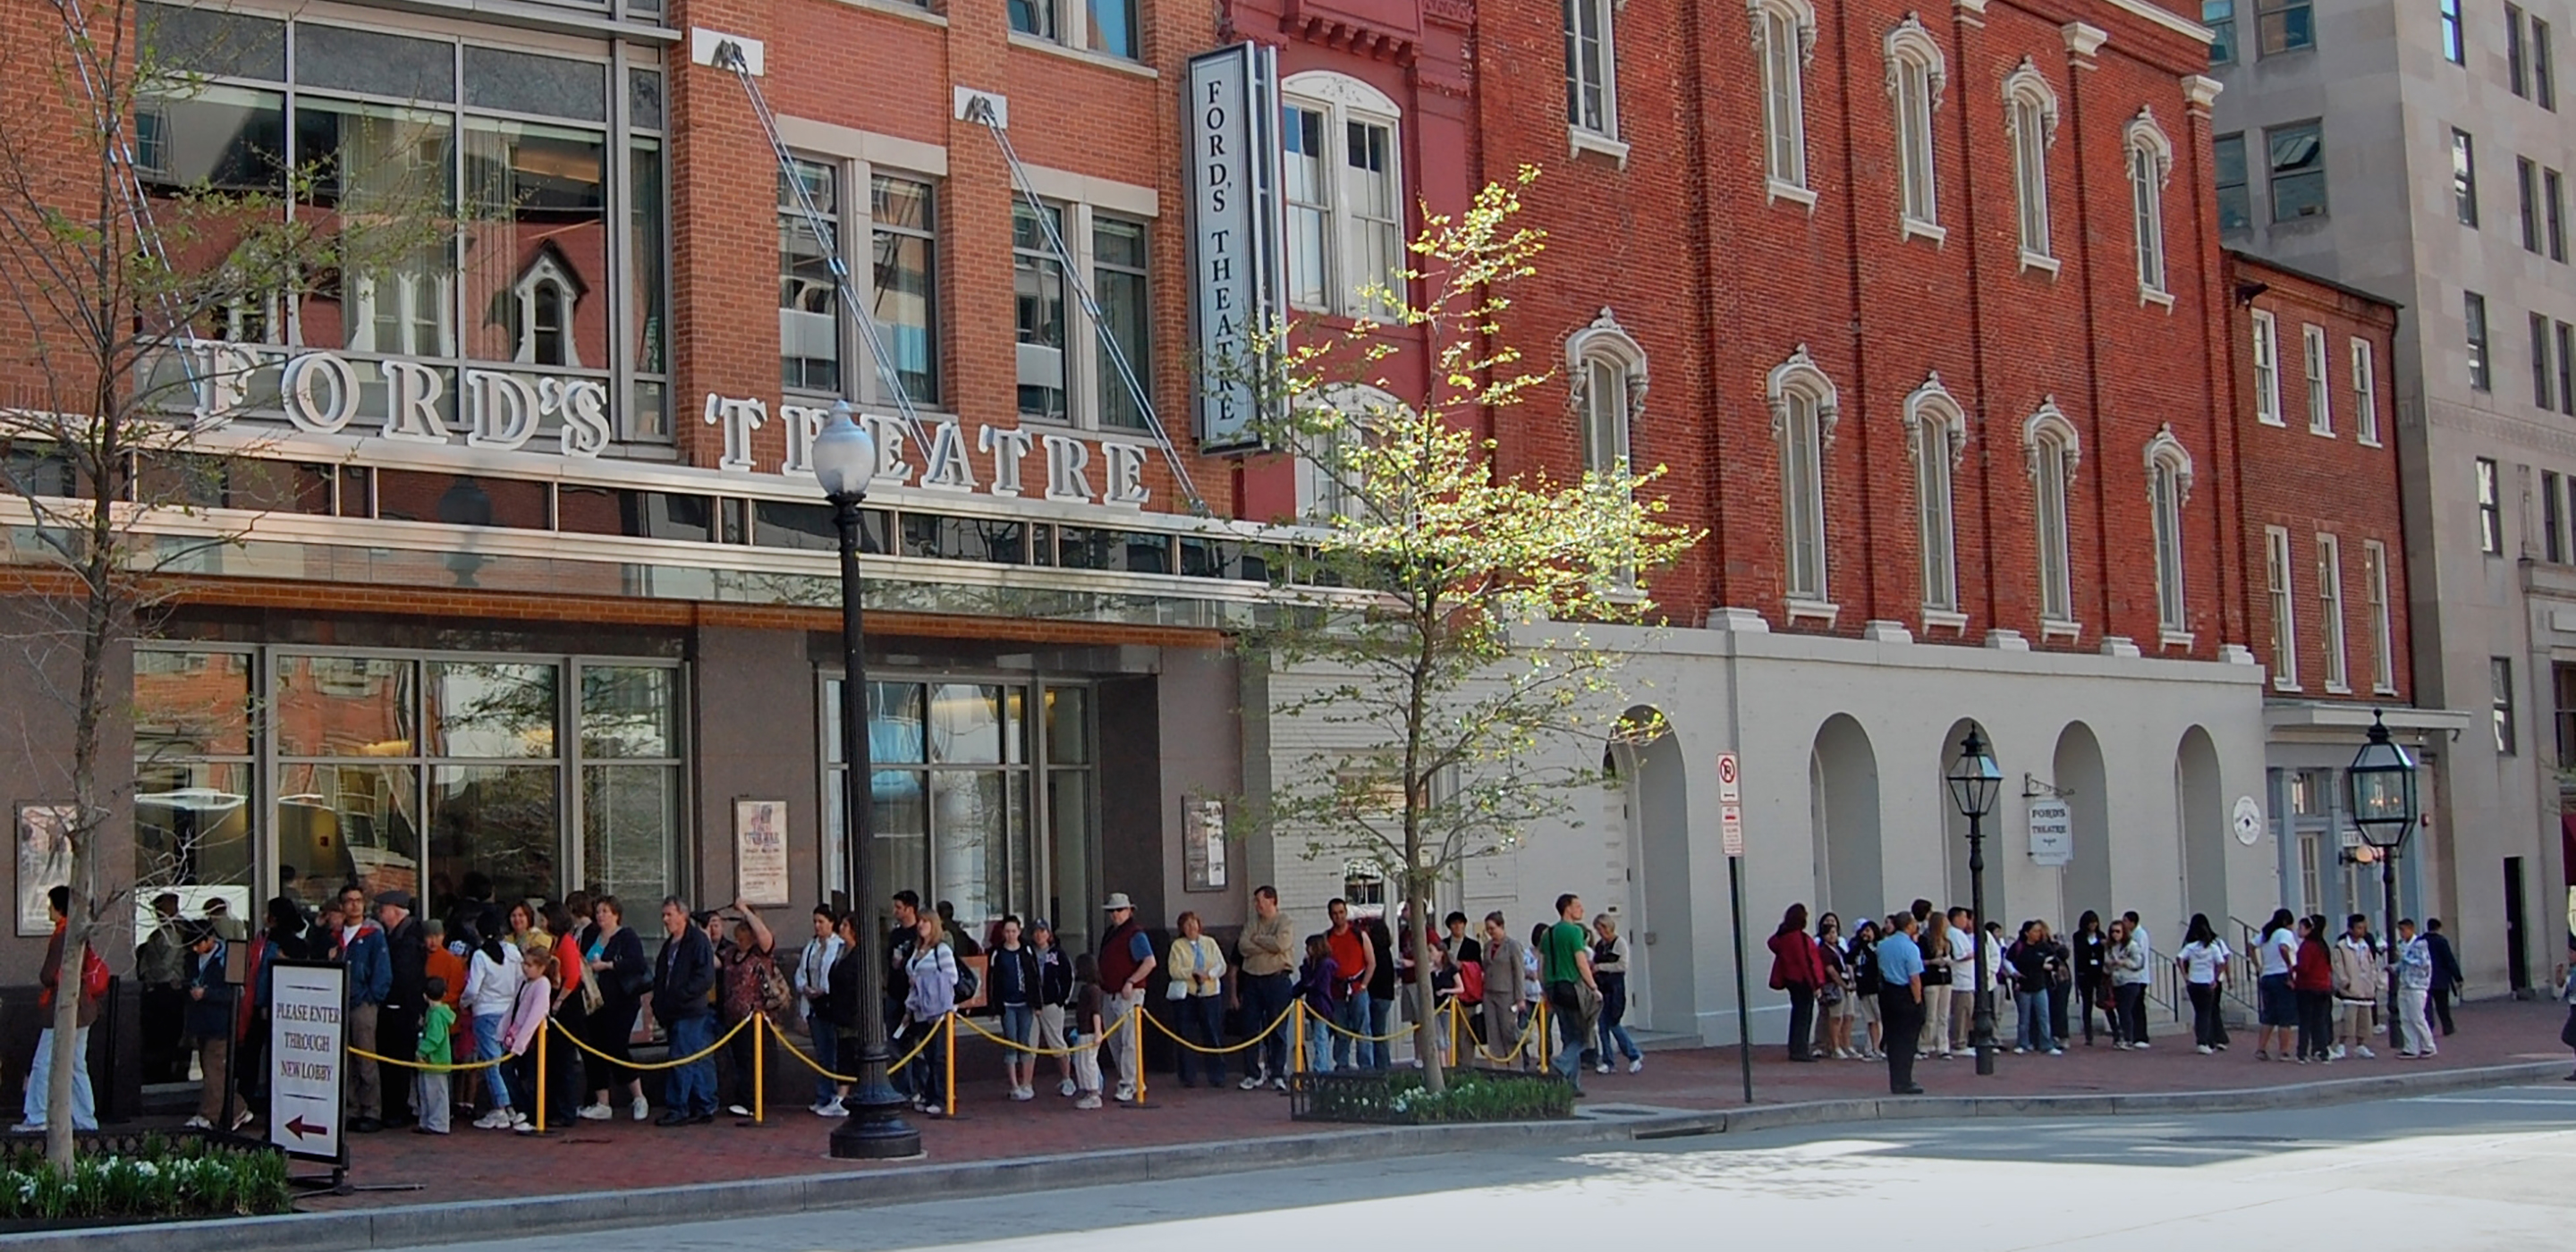 Daytime visitors stand in line on Tenth Street, waiting to enter the lobby of Ford’s Theatre to start their tour or the site.